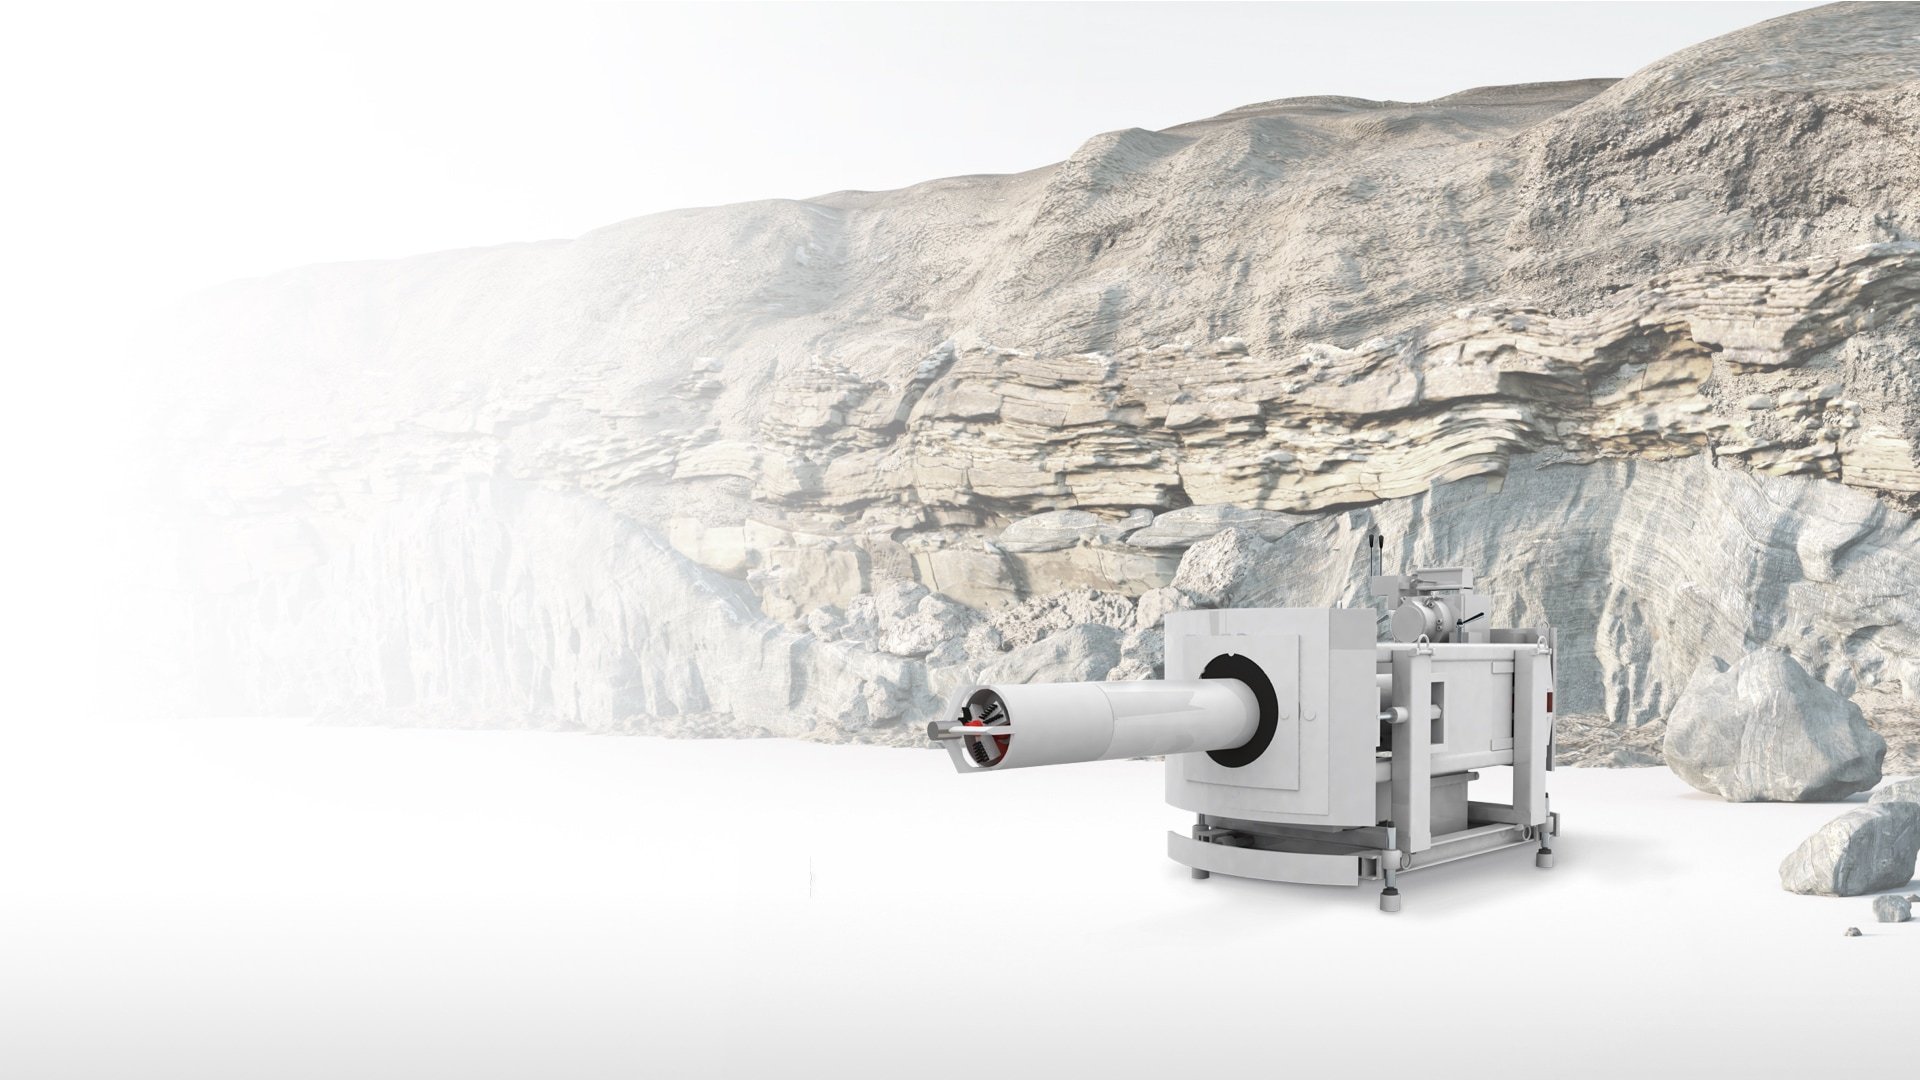 Illustration of an auger drilling machine with a stone wall in the background.